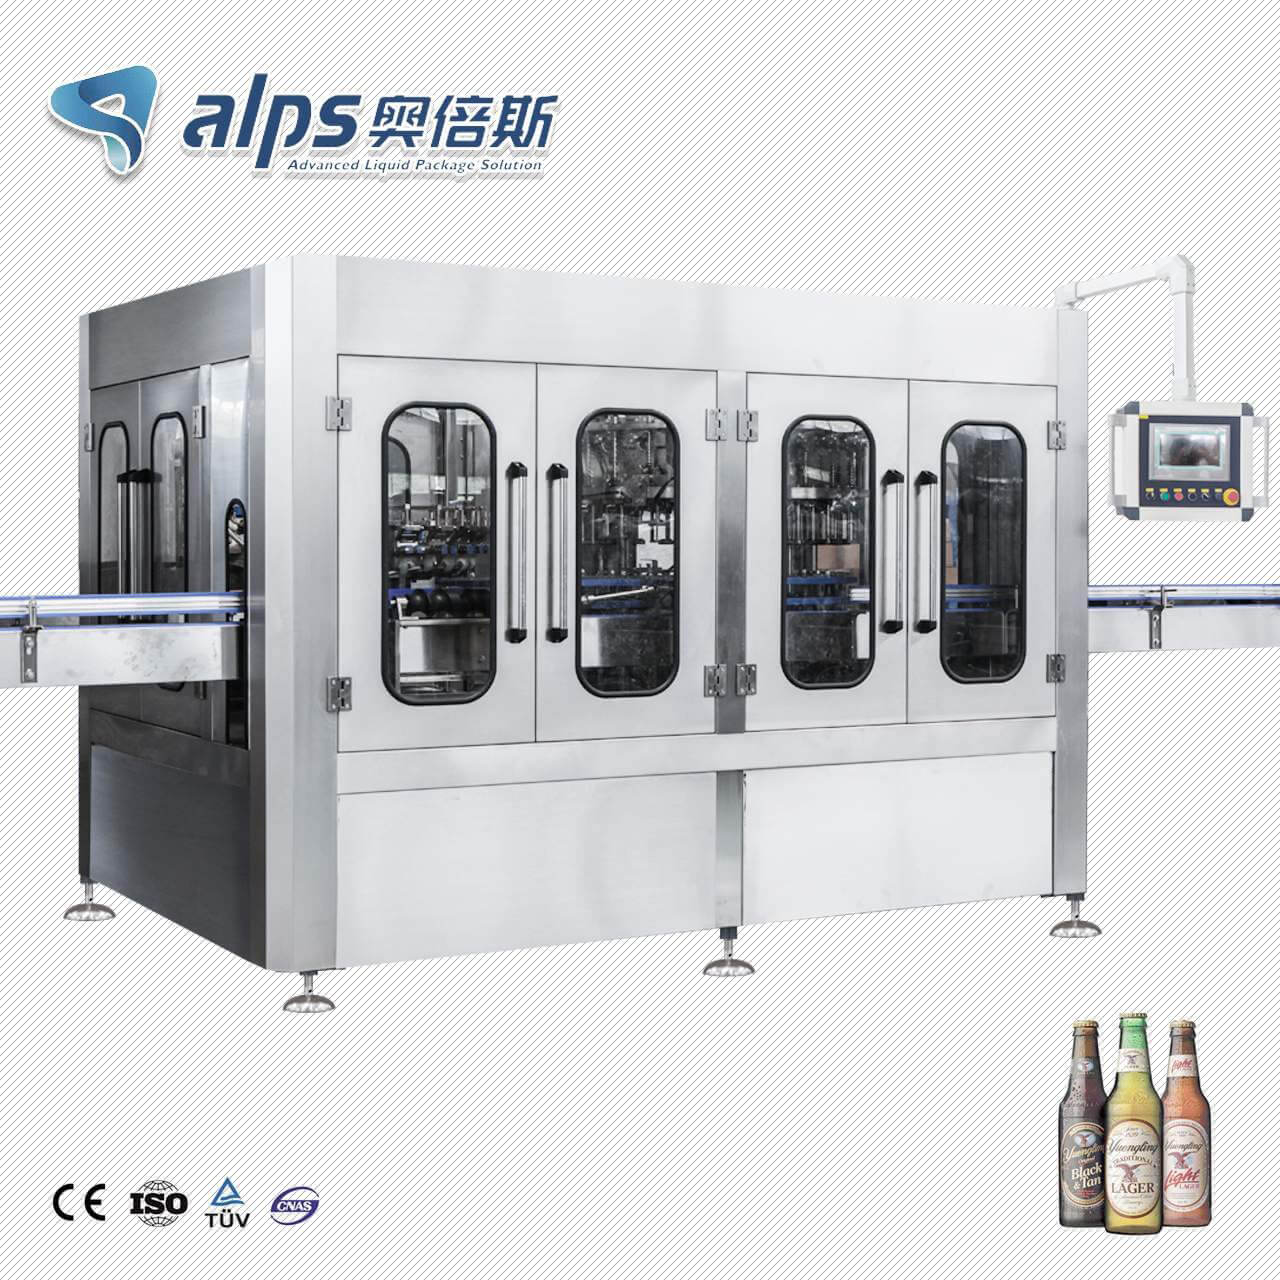 Beverage Filling Machine: A Key Enabler for Companies Seeking Sustainable Packaging Solutions